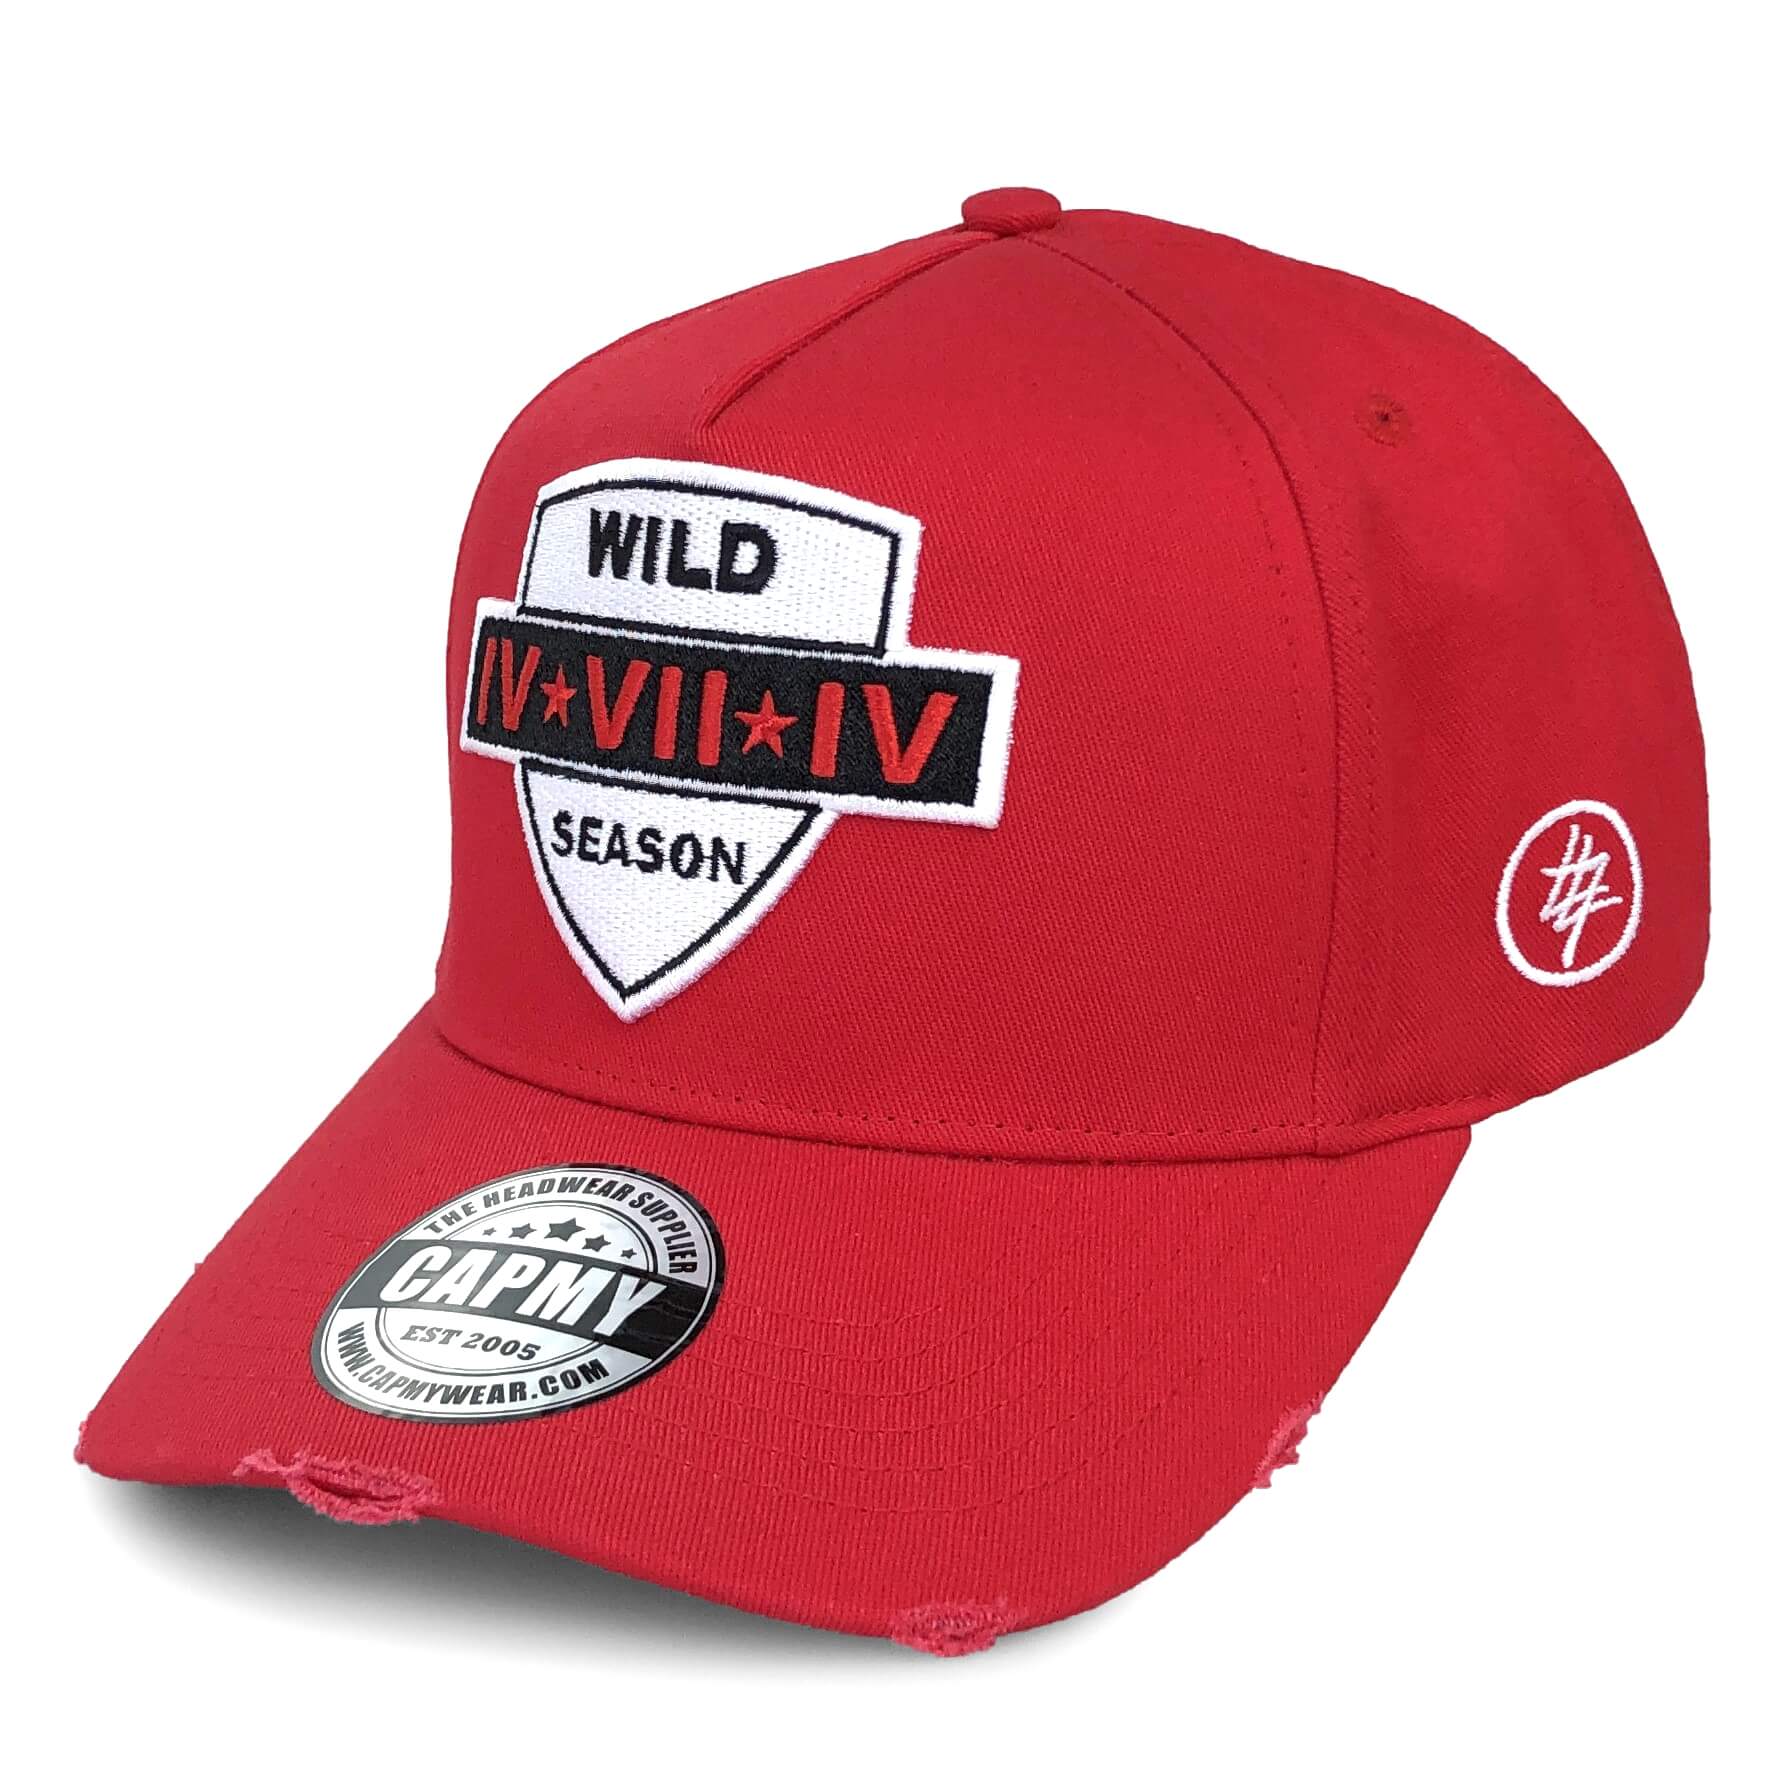 CMC-1126(High Quality Outdoor Red Cotton 5 Panel Caps 3D Embroidery Distressed Vintage Rip Baseball Cap Manufacturer)